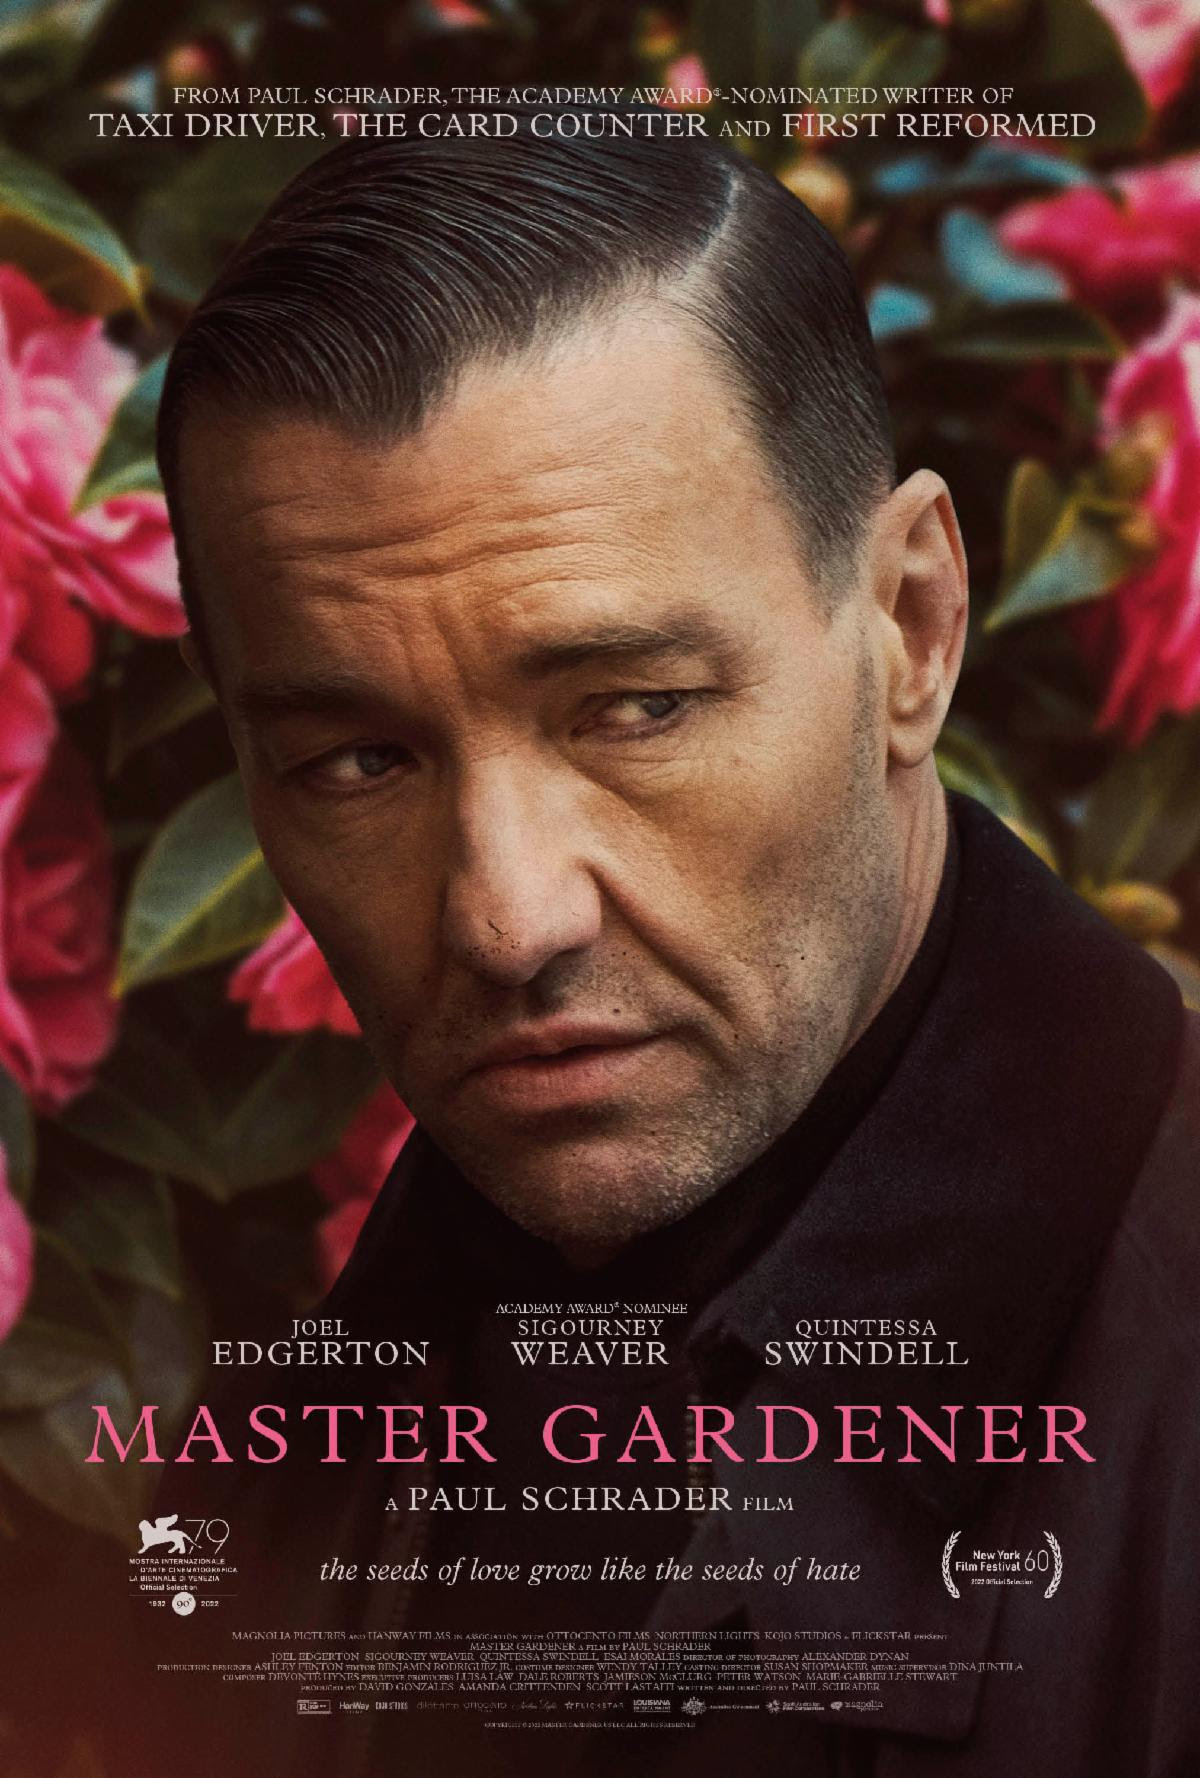 Master Gardener (2022) Cast, Release Date, Story, Budget, Collection, Poster, Trailer, Review